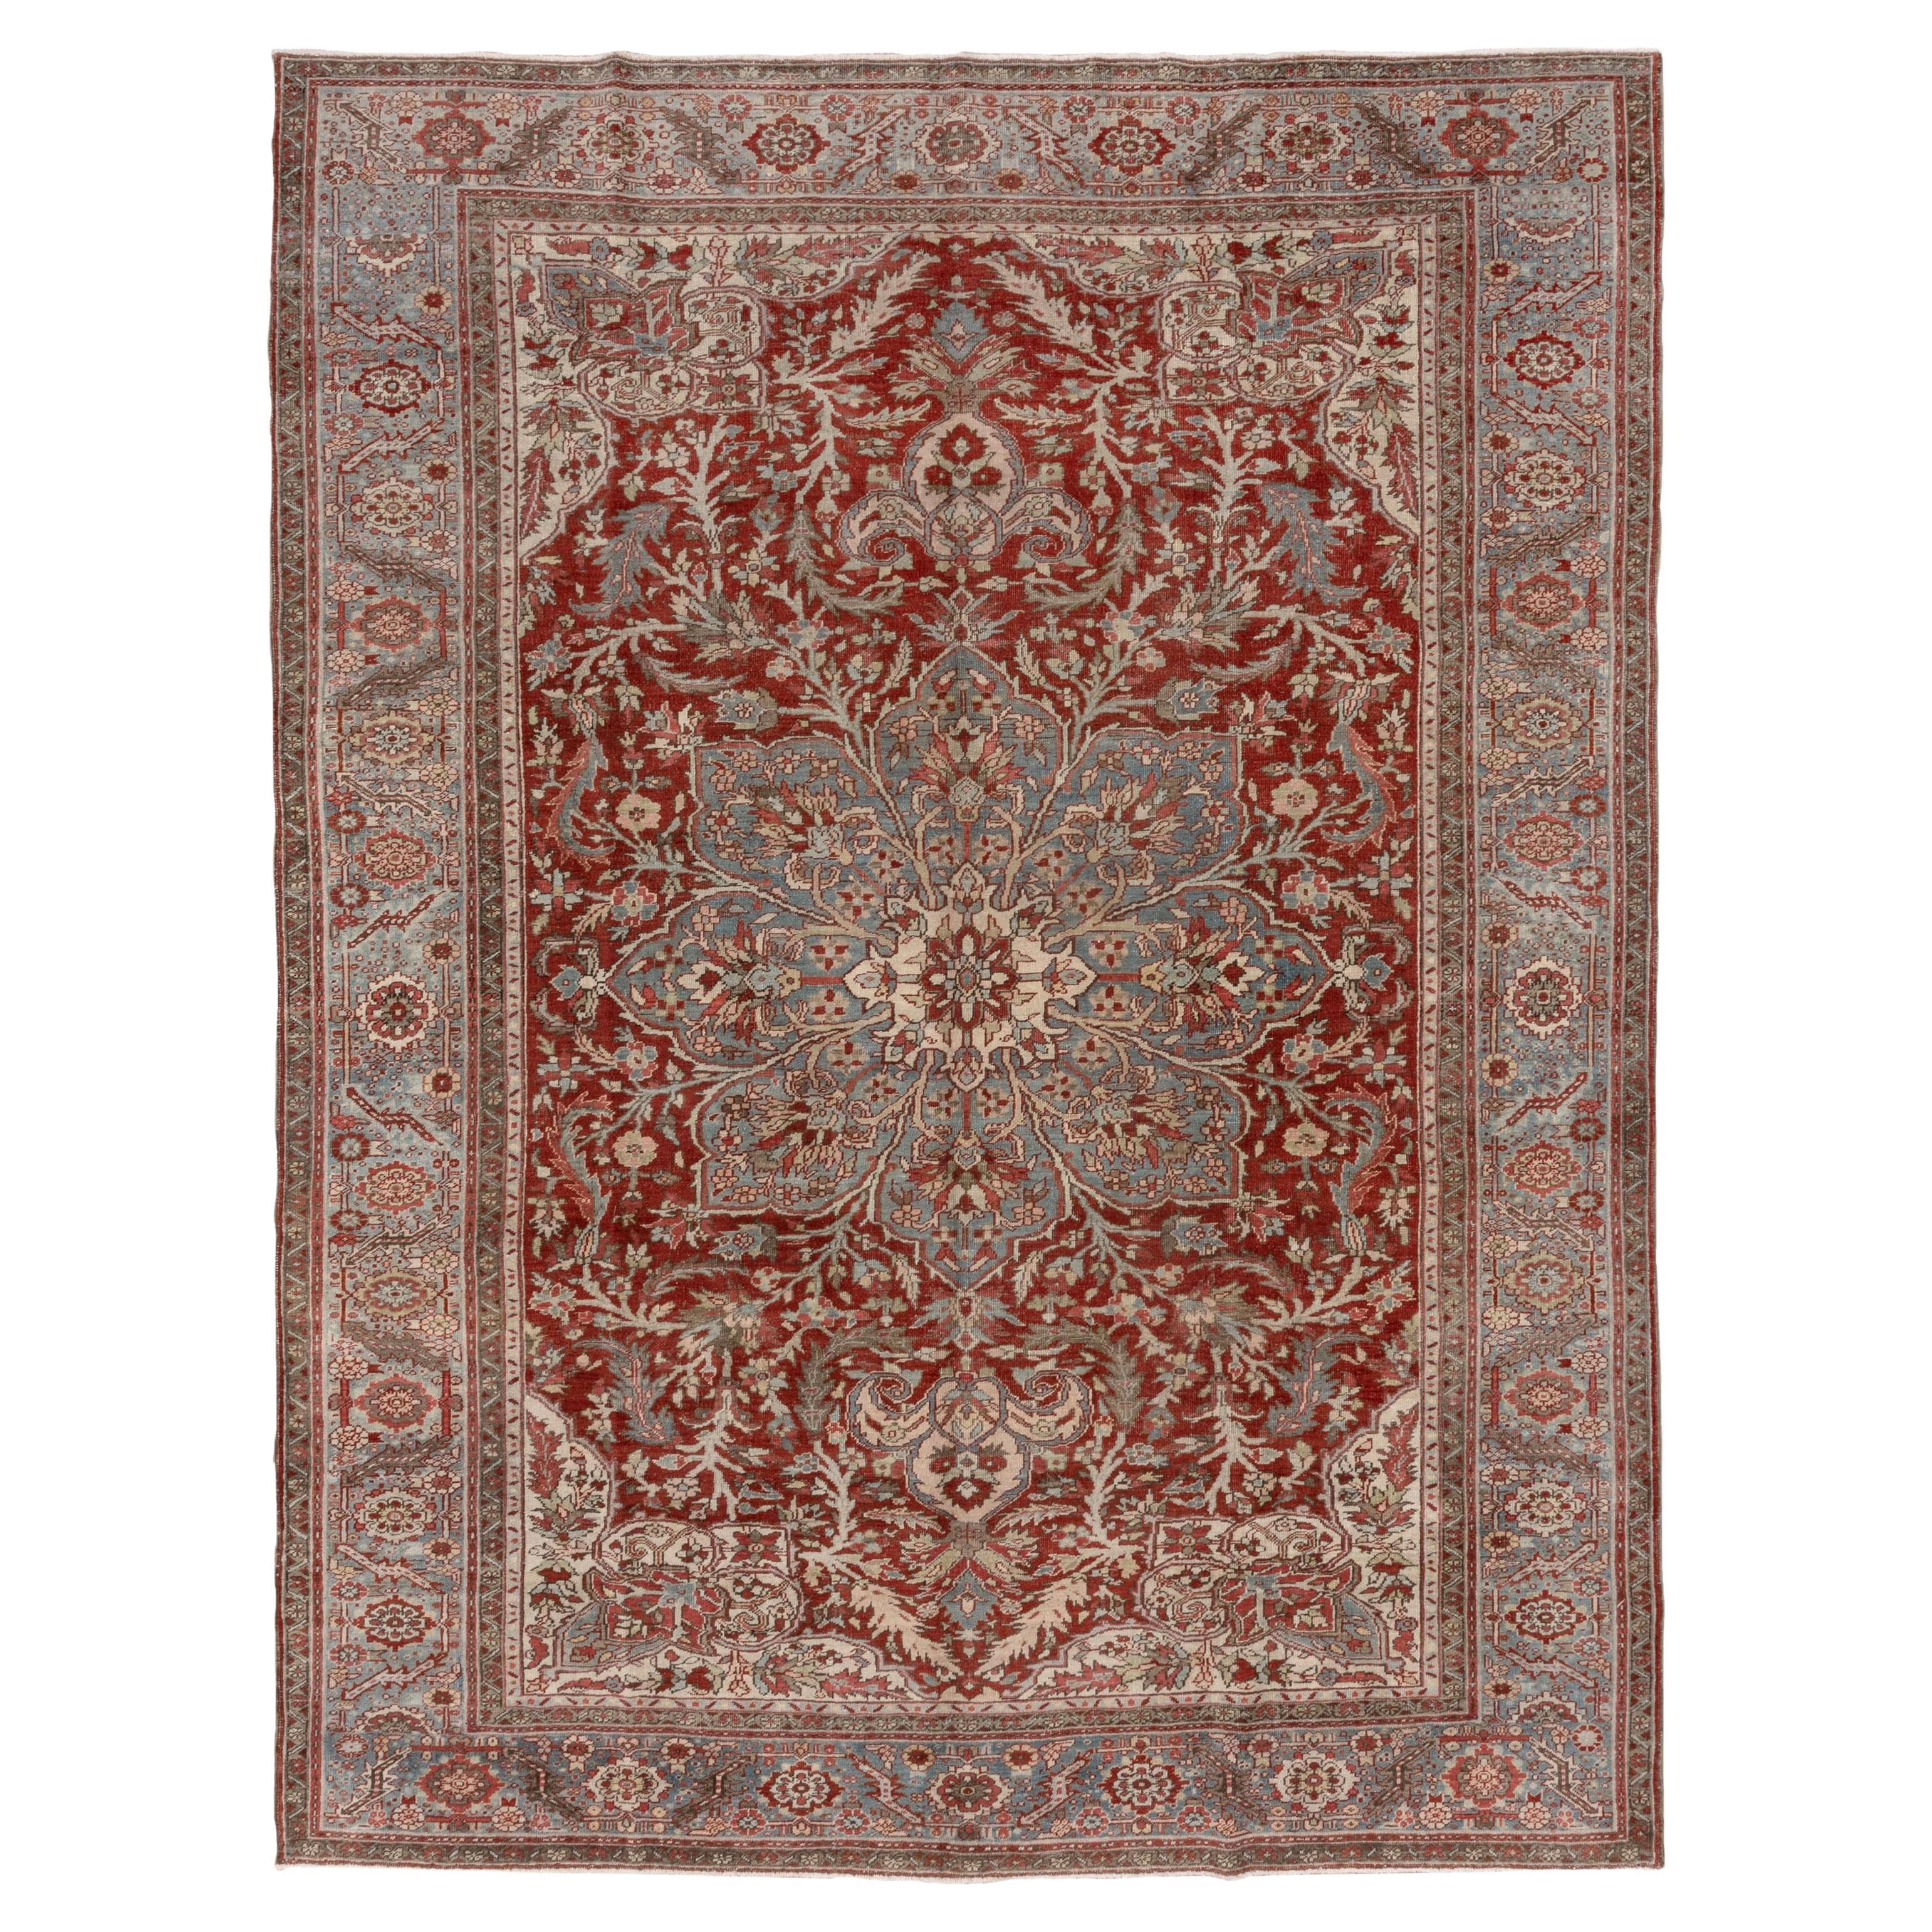 Finely Woven Antique Persian Heriz Rug, Red Outer Field Large, Unique Medallion